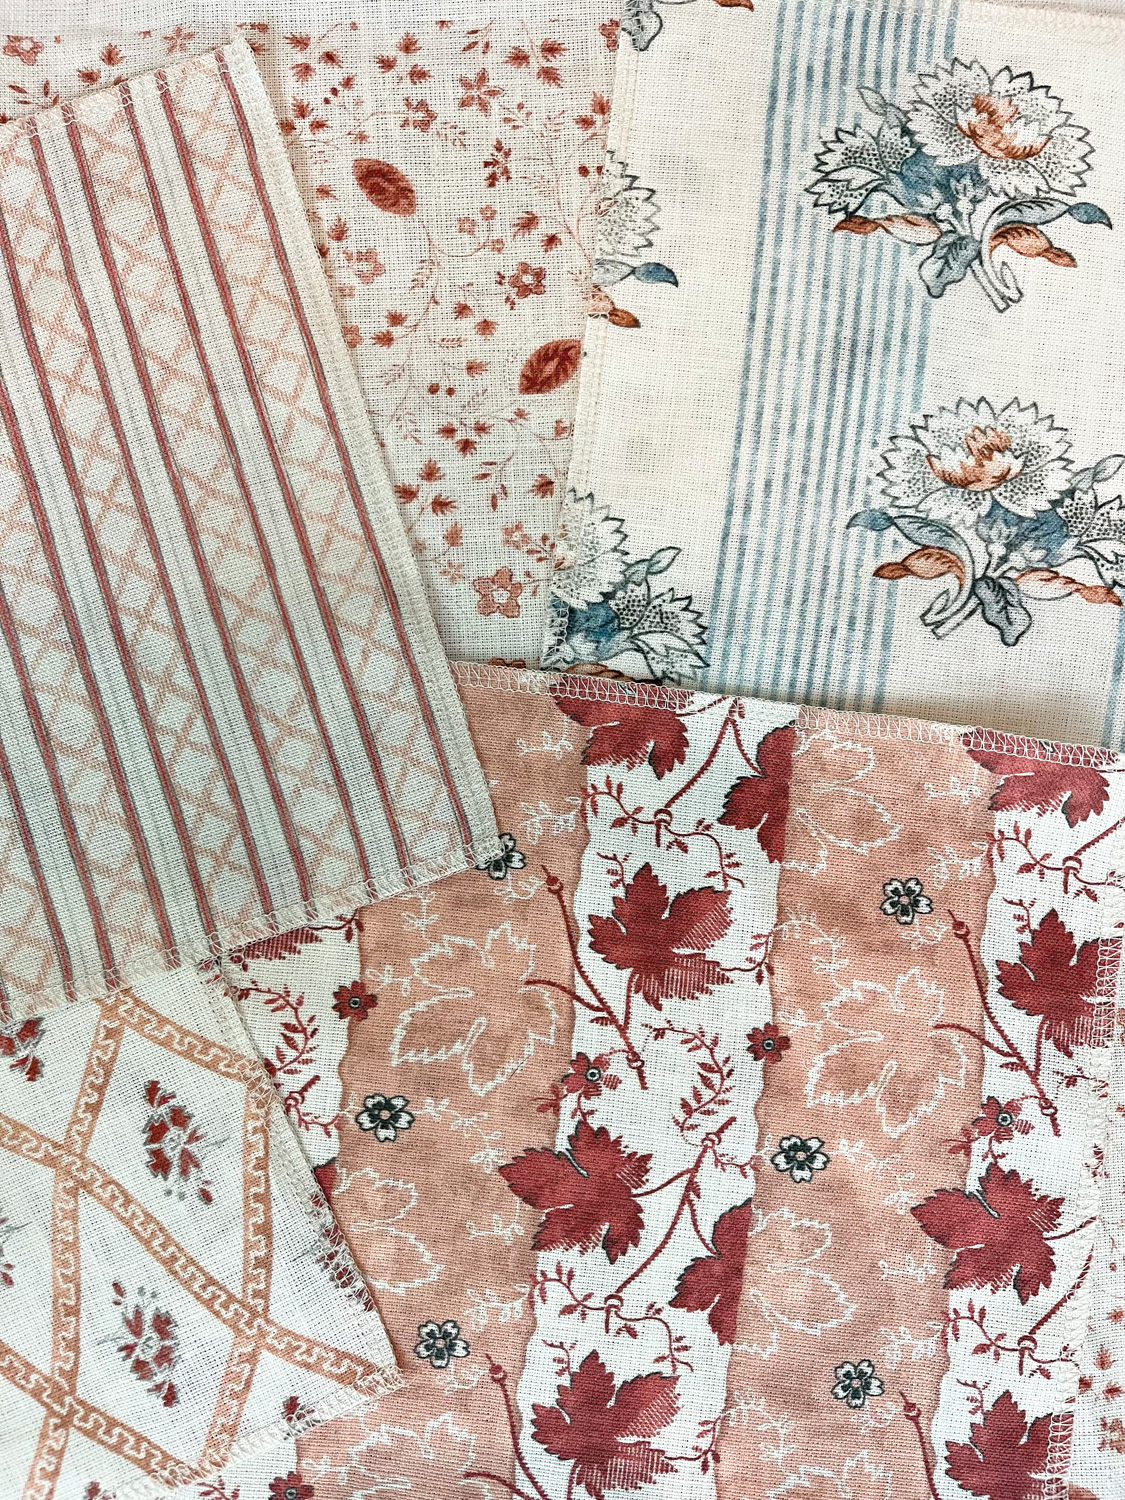 Textile samples of different floral patterns overlaid on top of each other